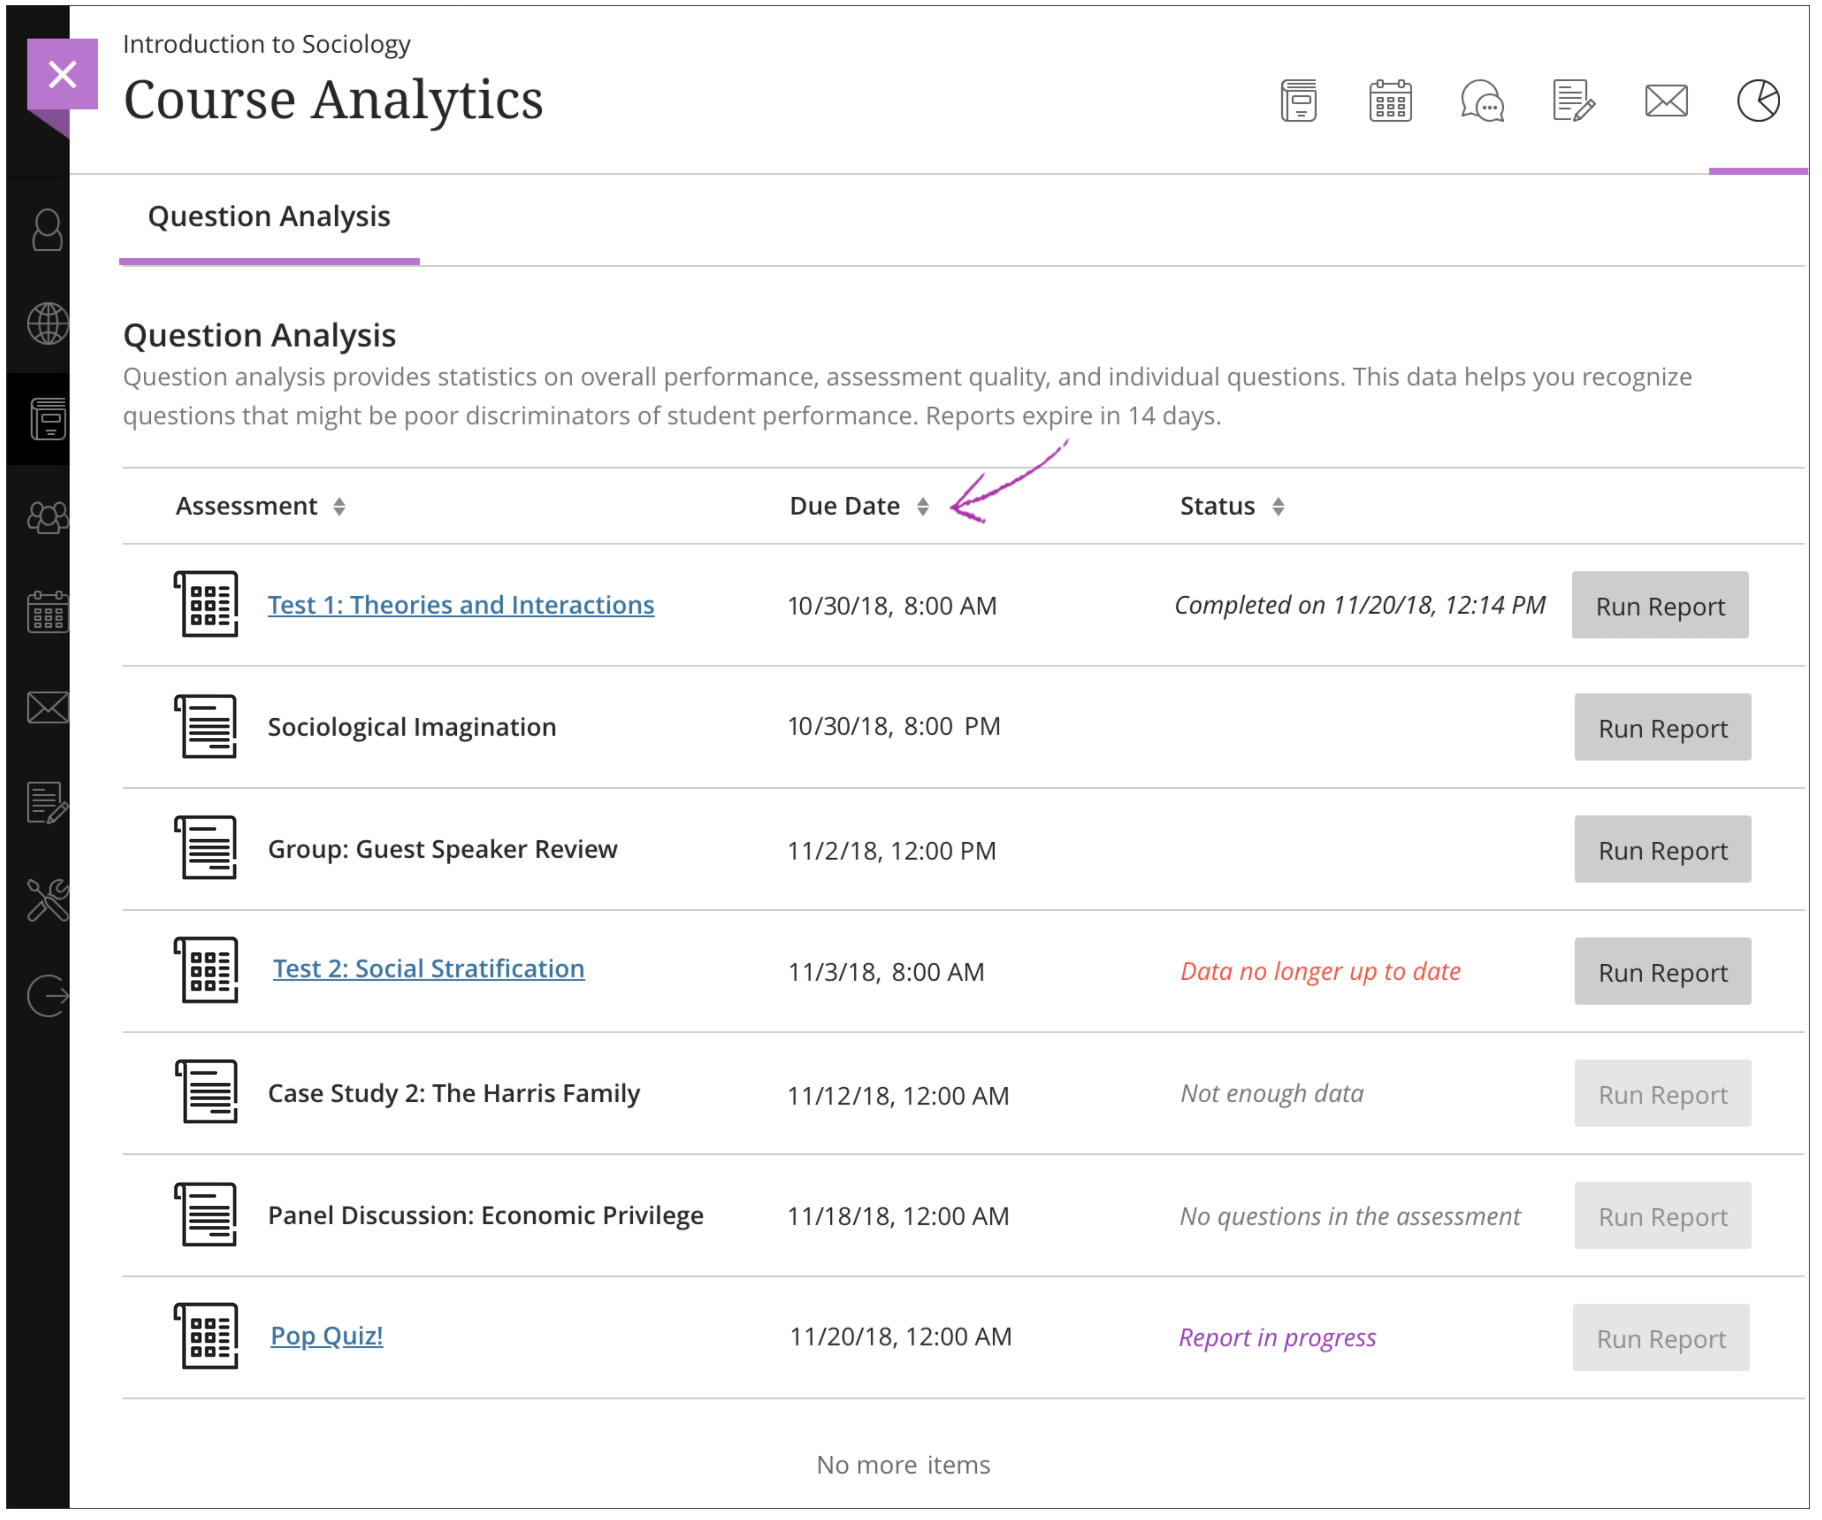 Course analytics question analysis page